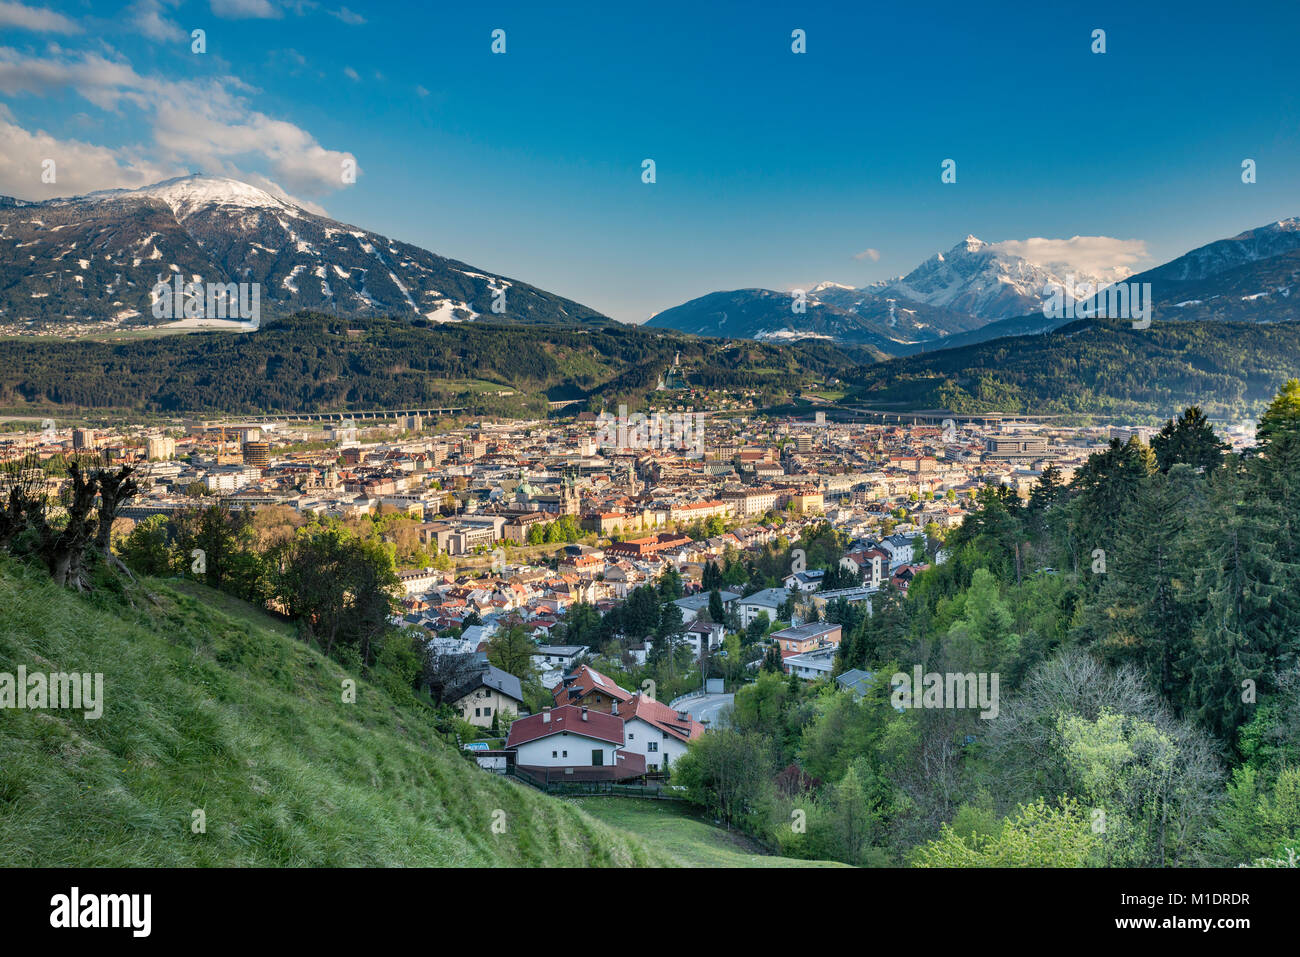 Center of Innsbruck in Lower Inn Valley, Grosse Loffler massif in Zillertal Alps covered with snow in late April in distance, Innsbruck, Austria Stock Photo